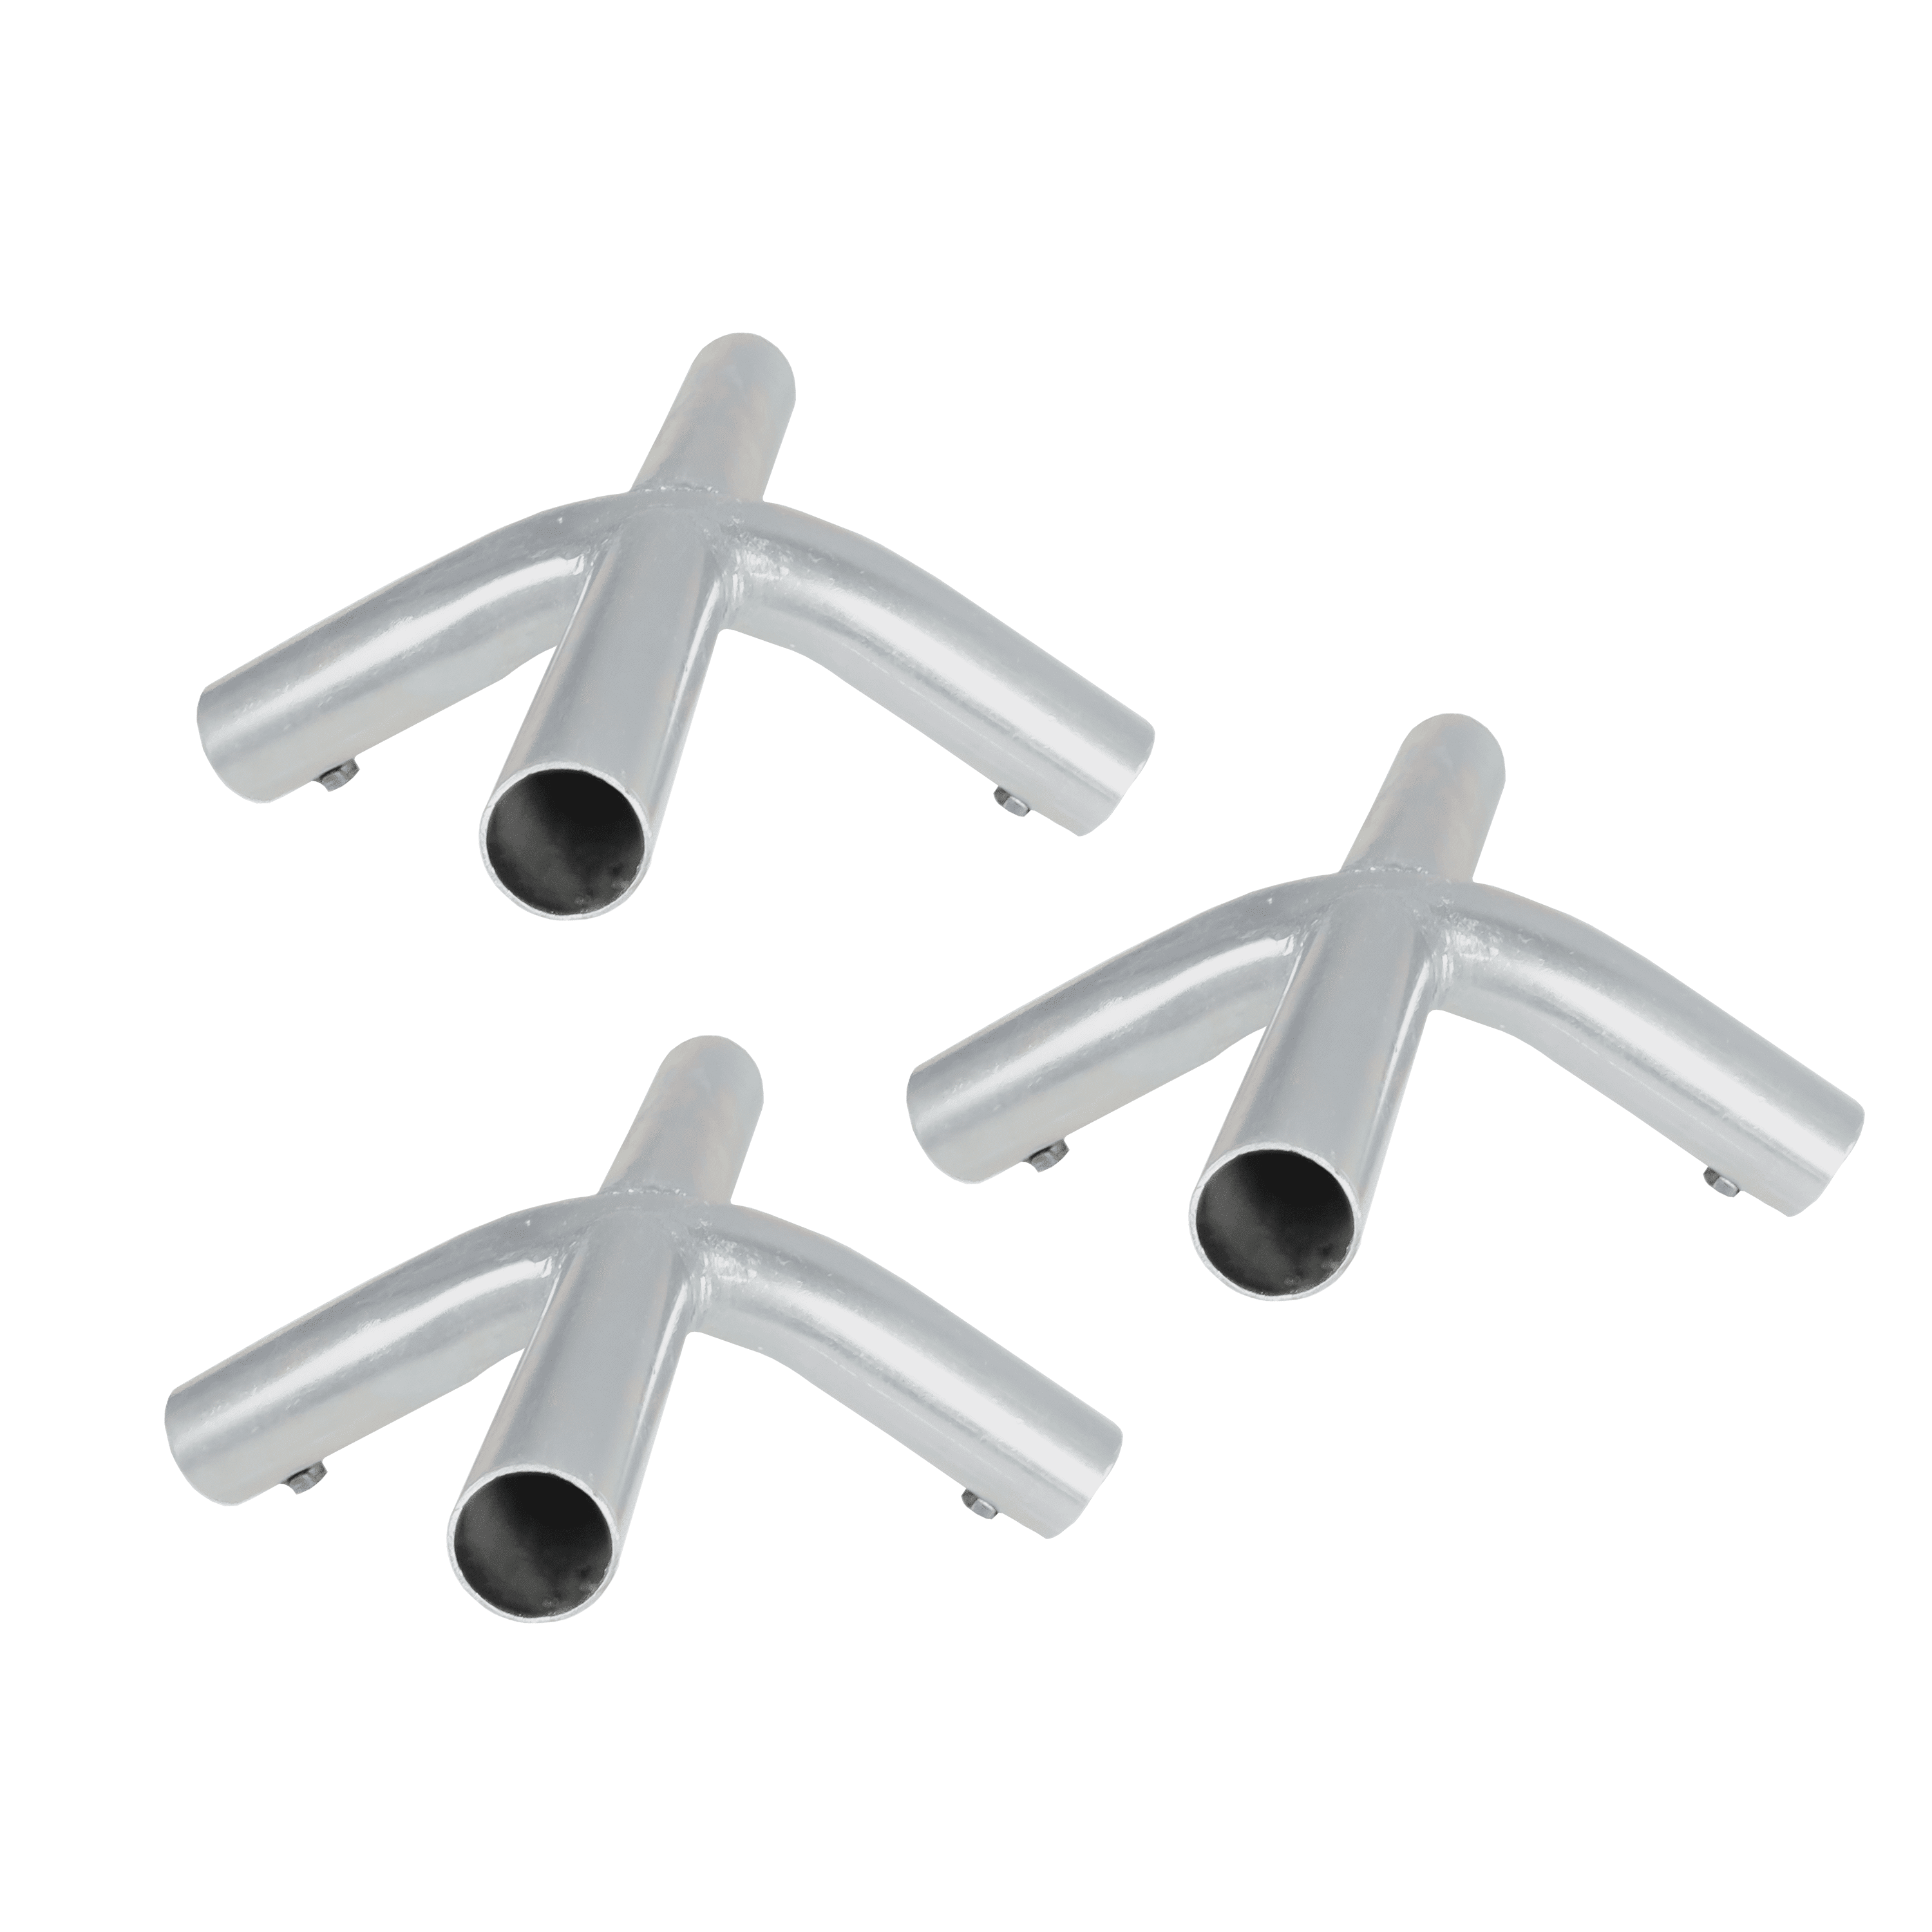 1 3/8" pipe 4pc 2 Way Joiner Fitting Pipe Connector Canopy Patio Carport FVFC 